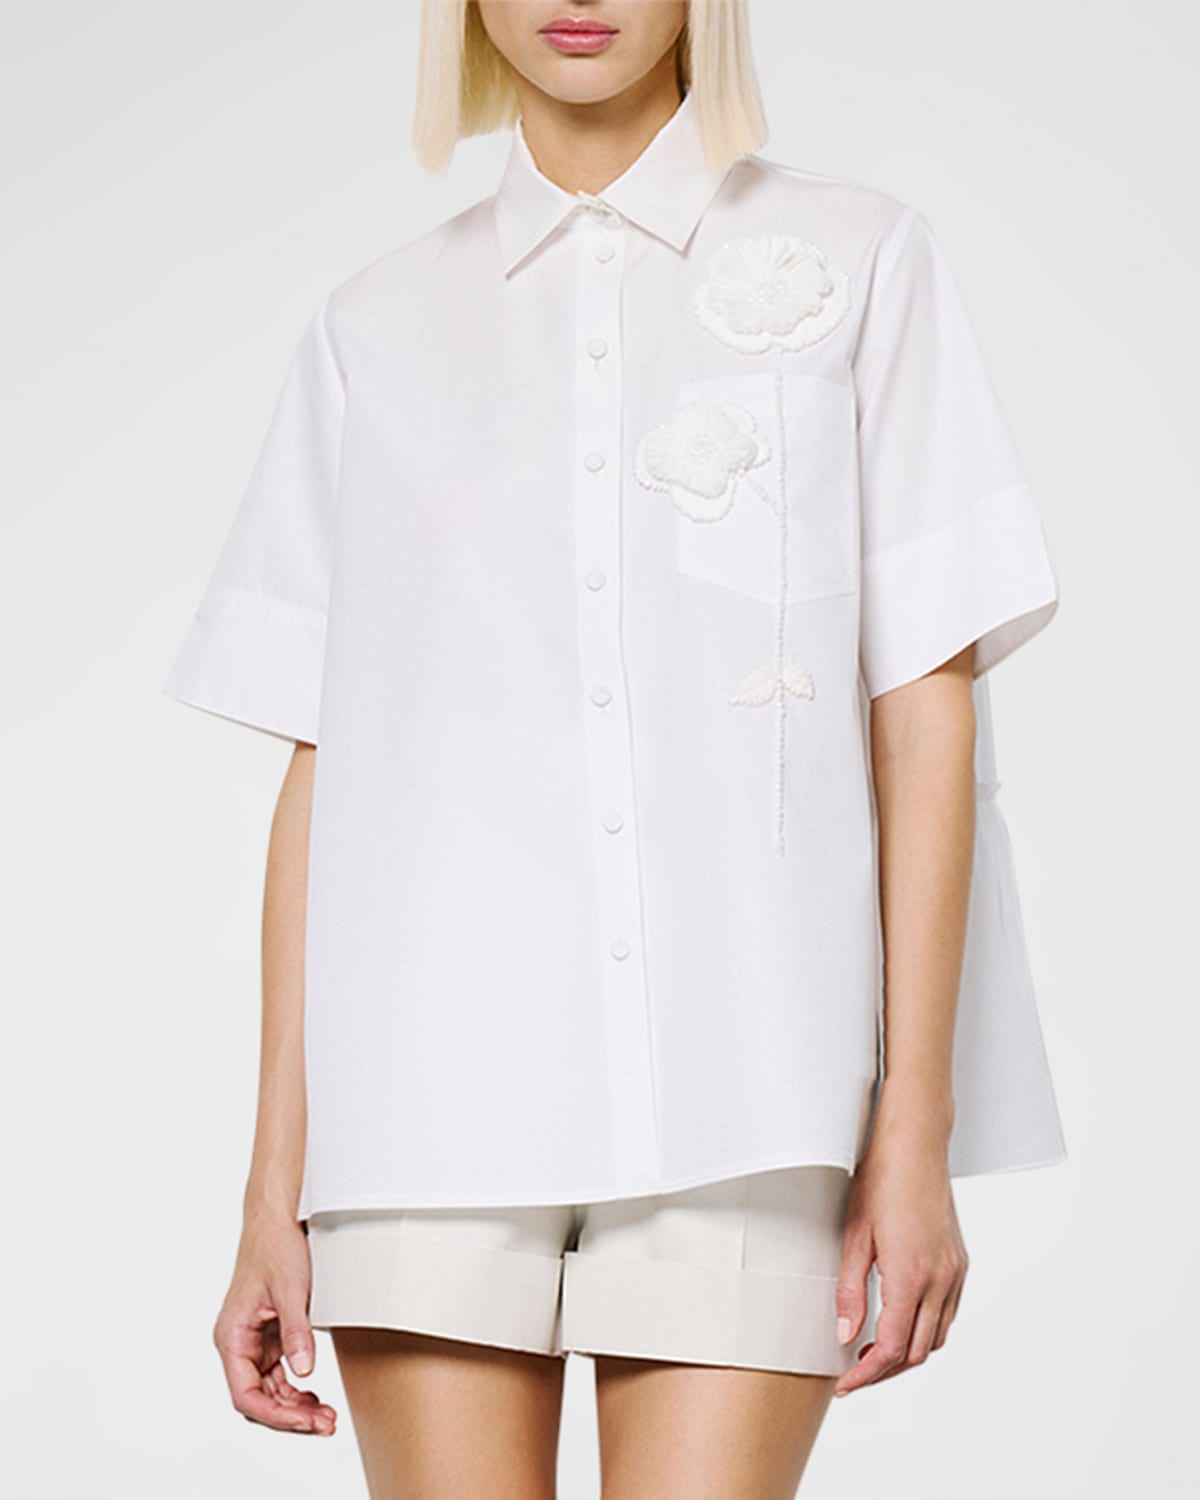 Dice Kayek Floral Embroidered Tiered-back Collared Shirt In White